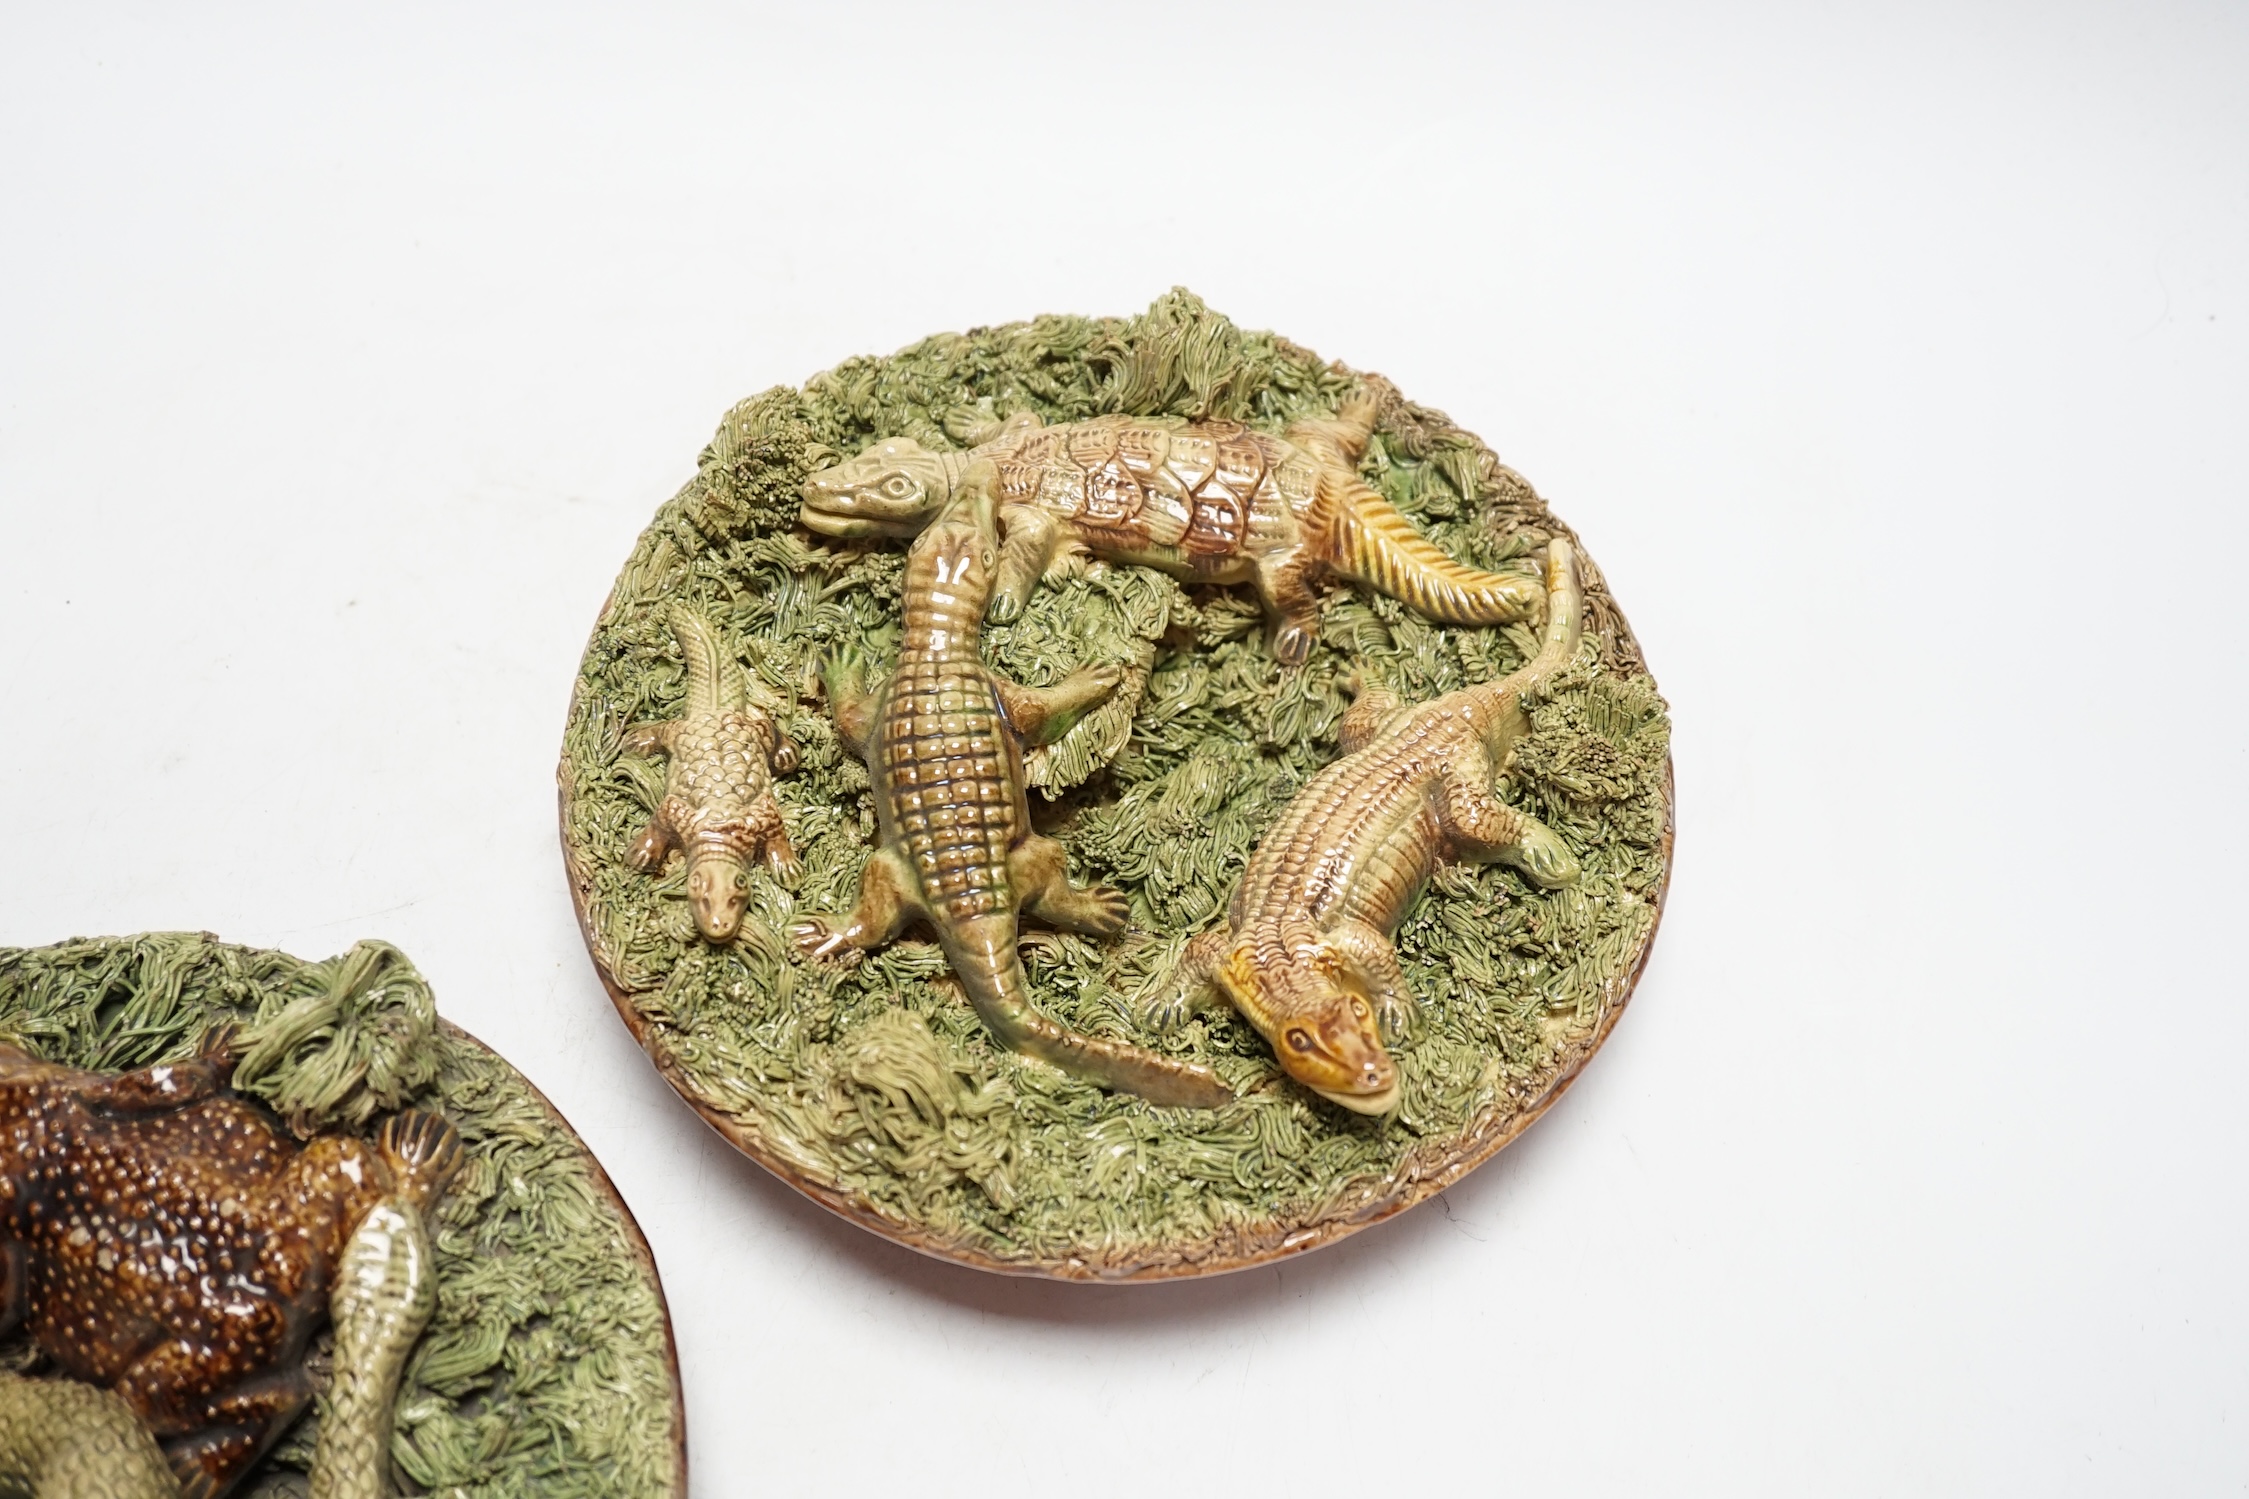 Two Caldas Palissy ware dishes decorated with crocodiles, a frog and a snake, the larger 21cm diameter